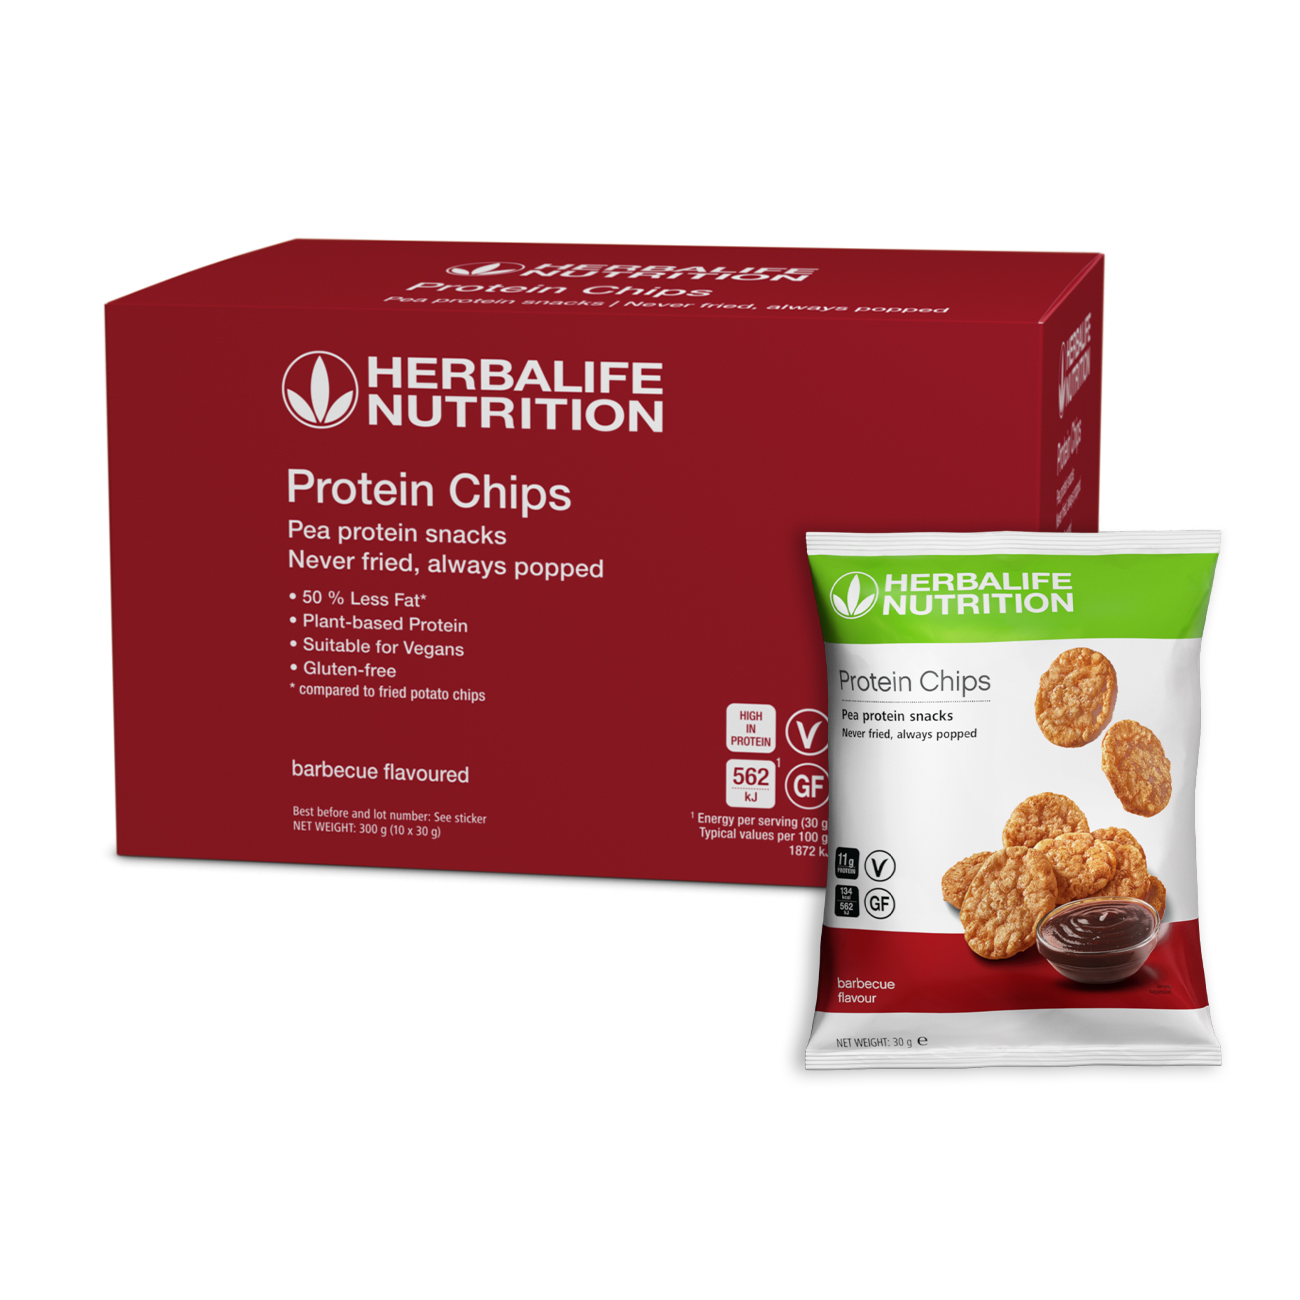 Protein chips are a popped and nutritious savoury snack and are a great way to stay on track with your nutrition goals on the go.